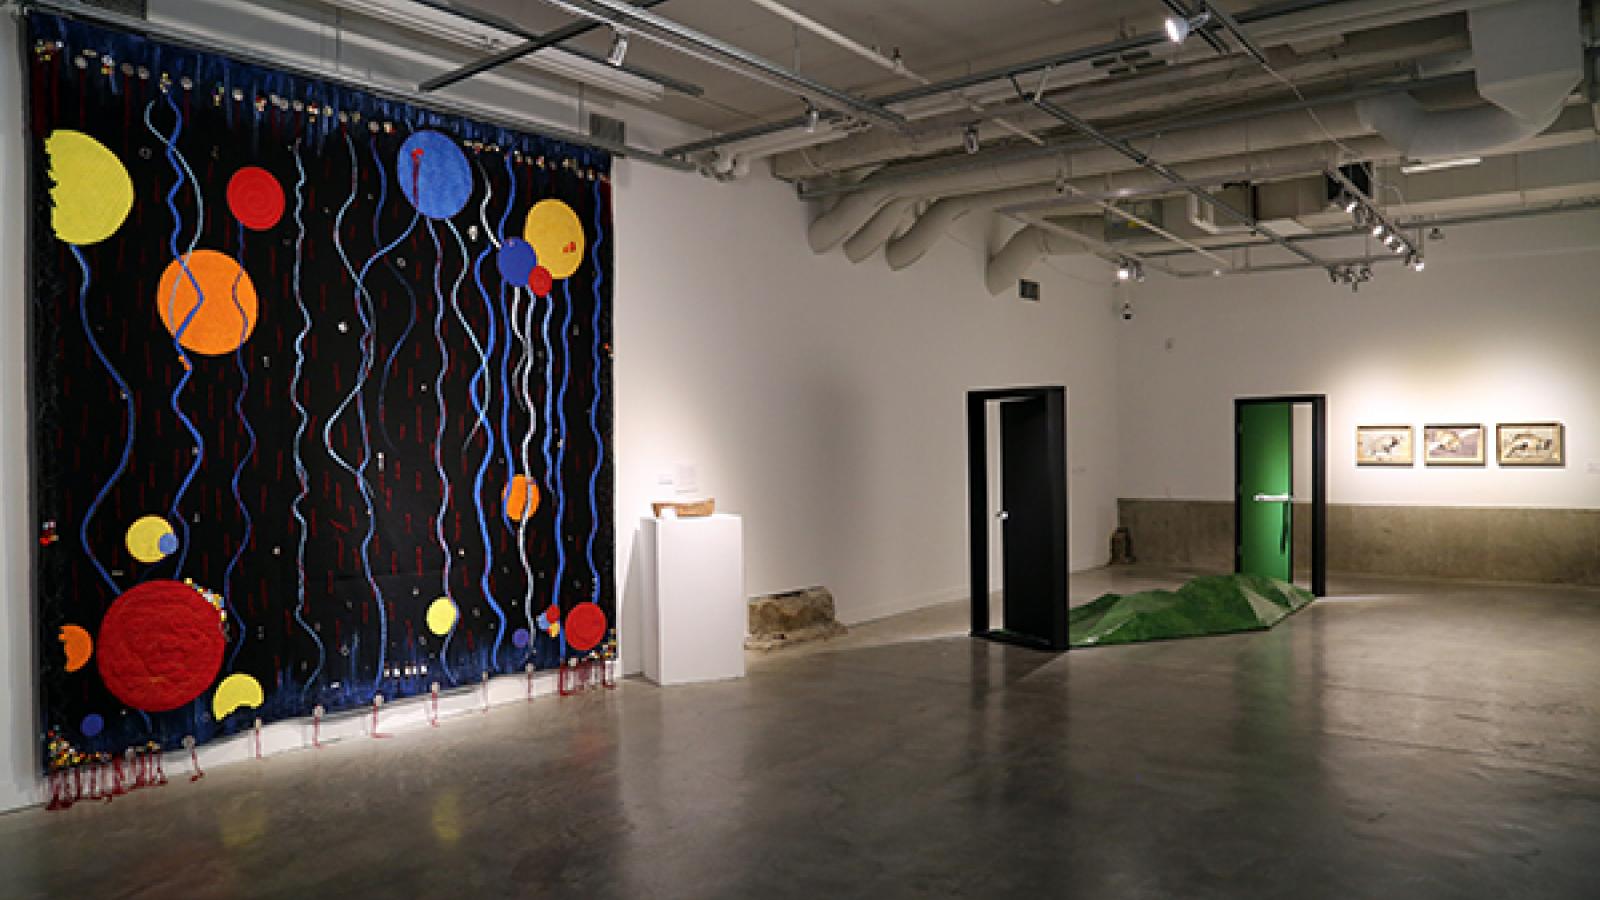 Gallery view of "Remnants"